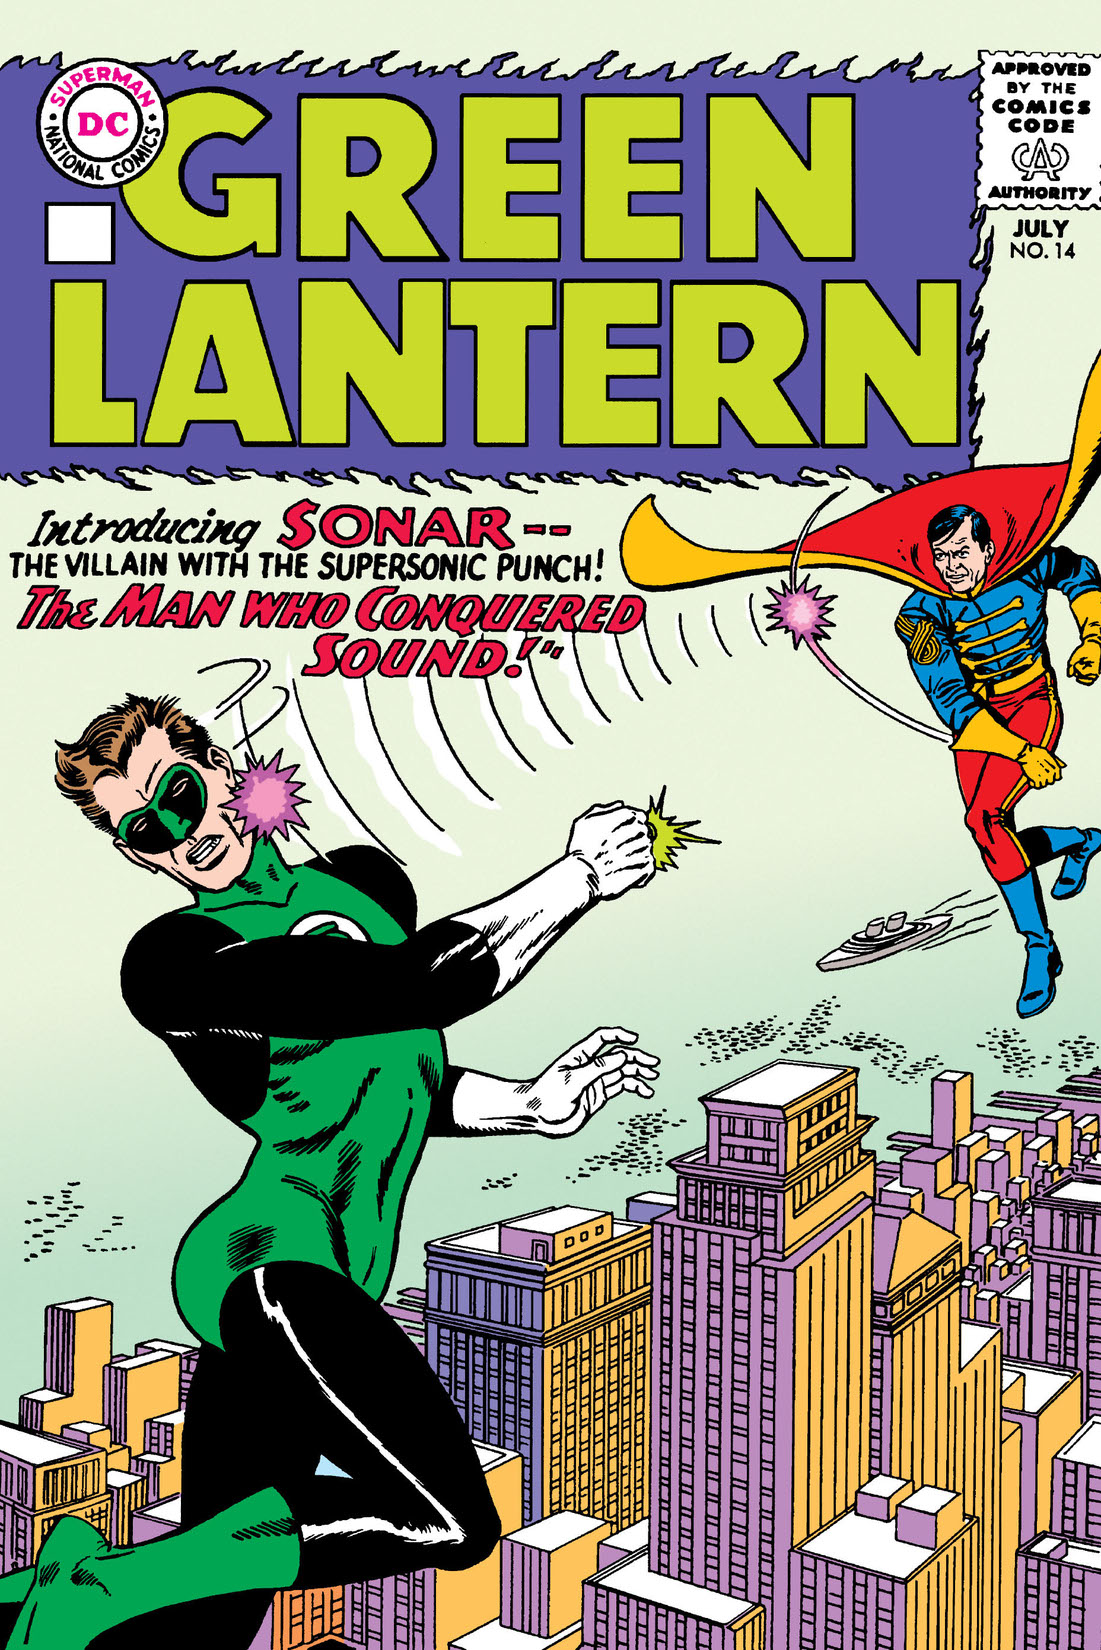 Green Lantern (1960-) #14 preview images